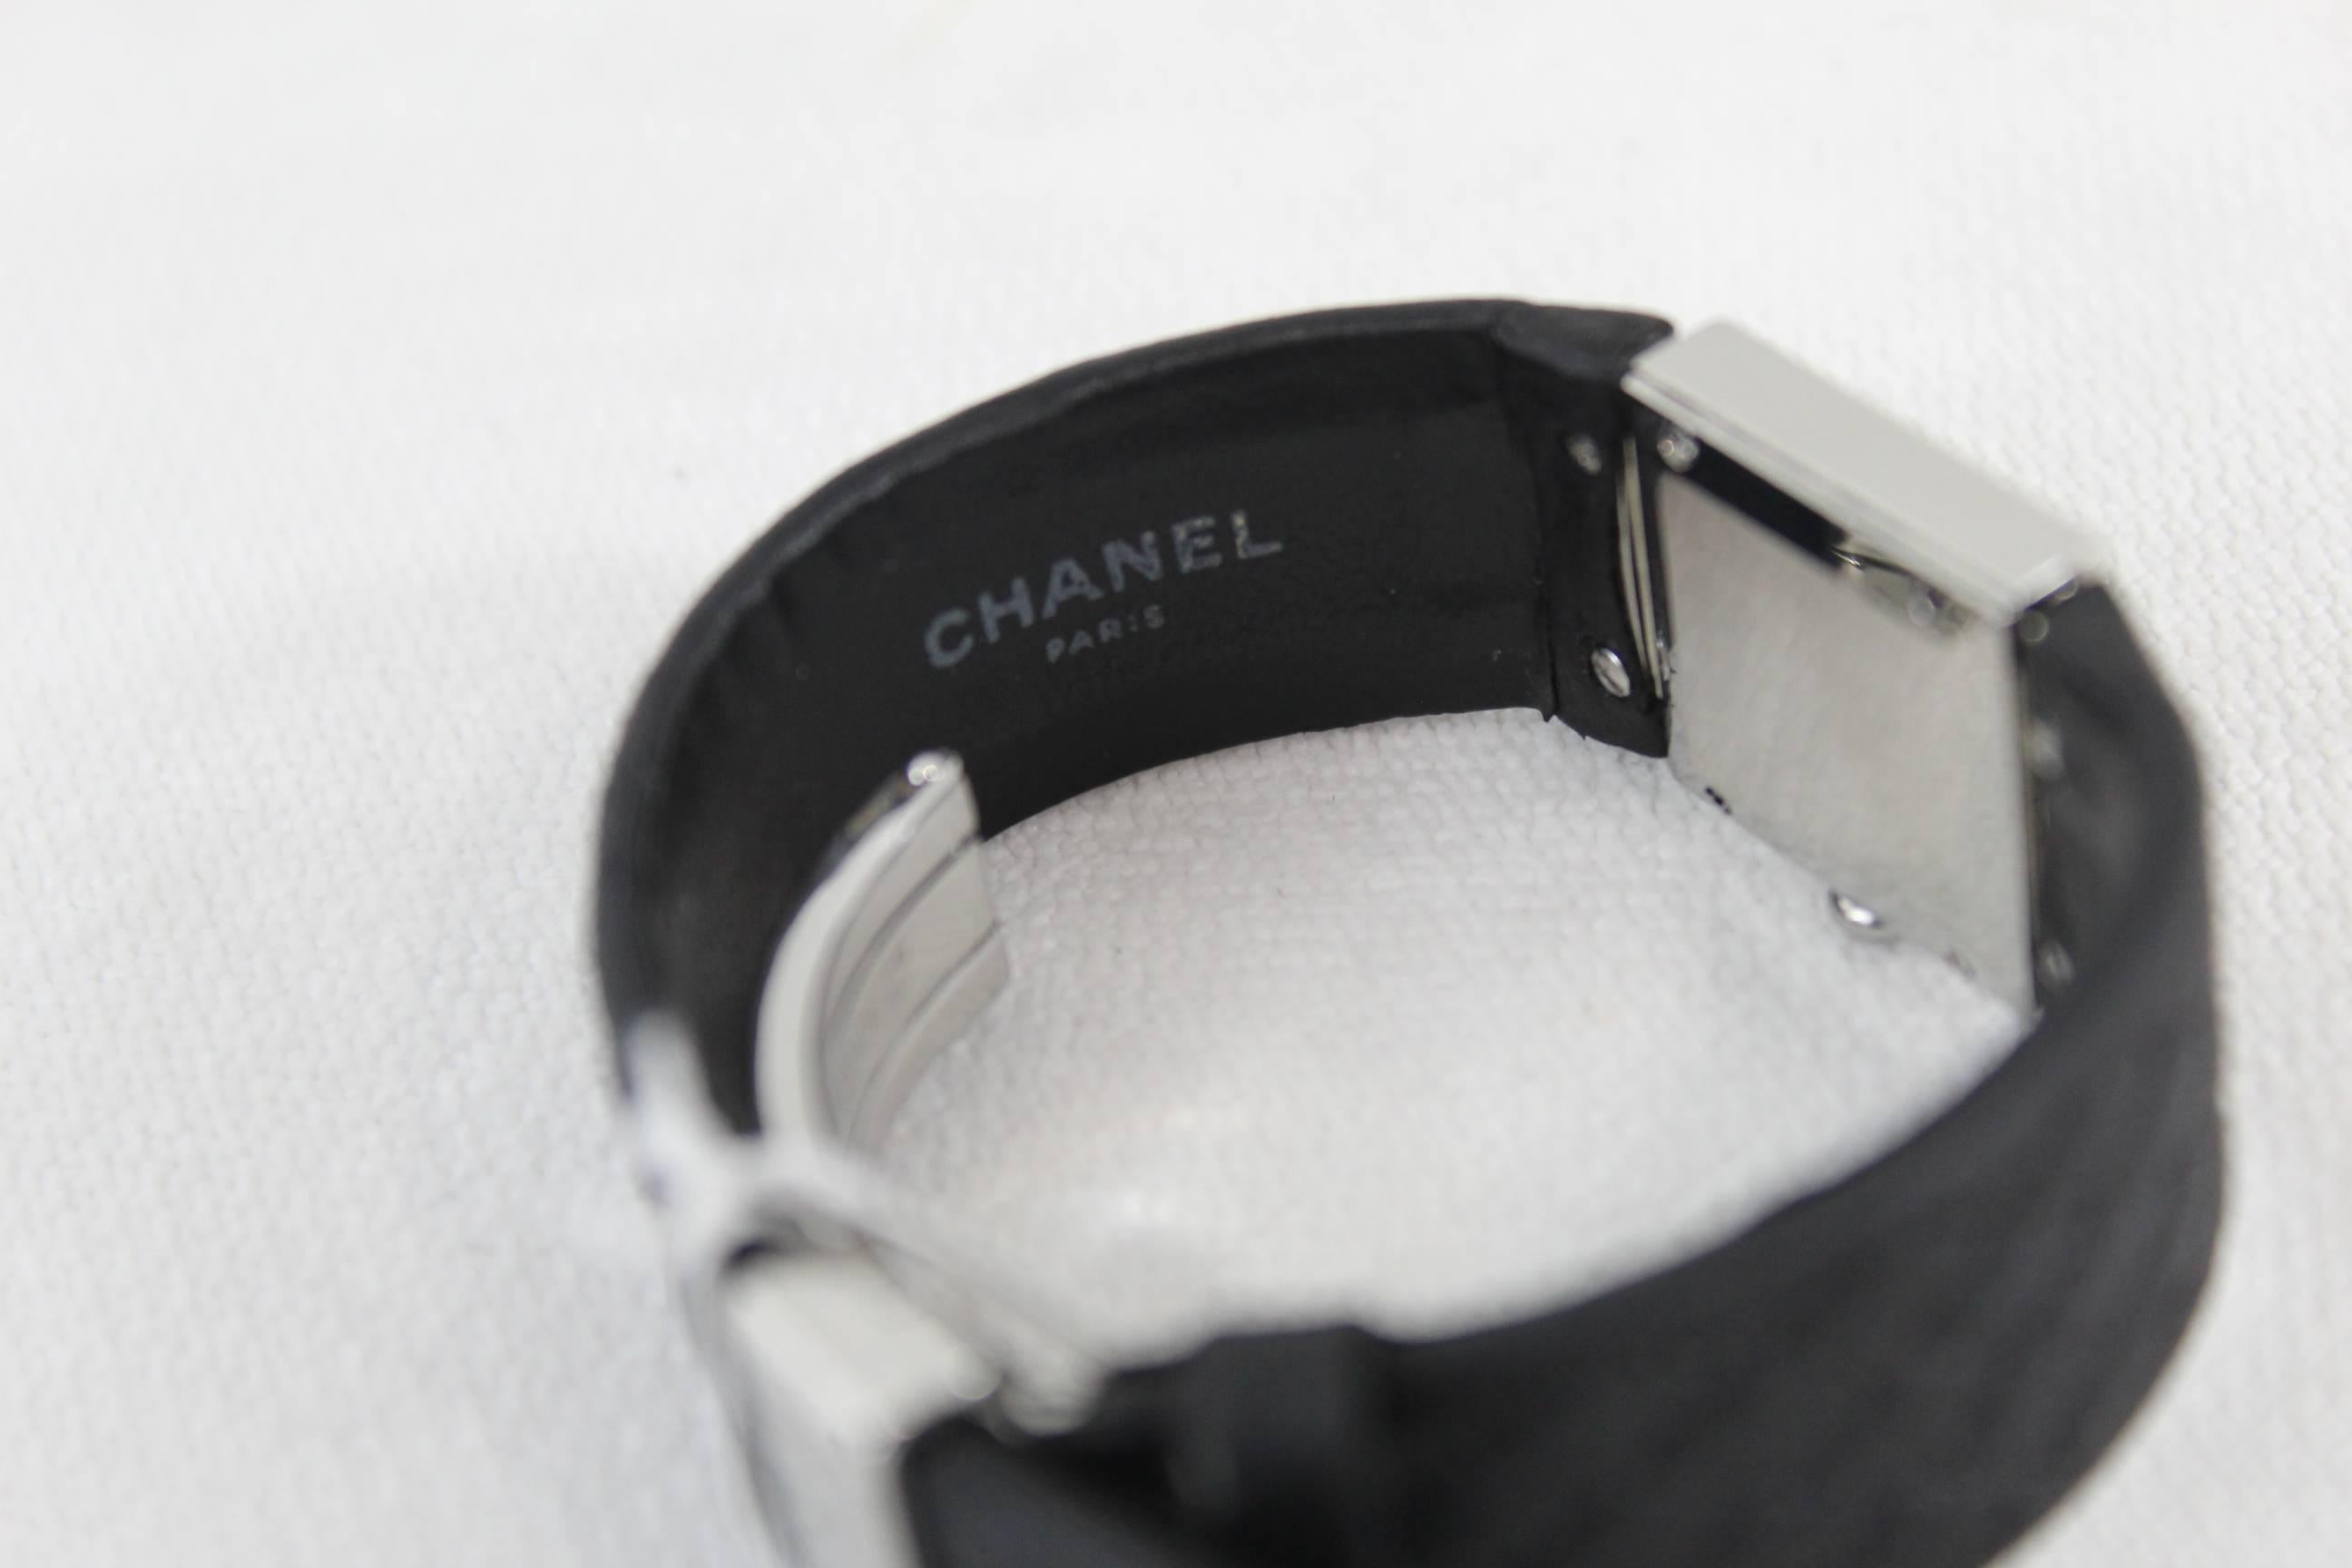 Nice Chanel watch in stainless steel and leather and nylon band.

generla good condition but case have some light signs of wear.

Band presents some signs of wear
